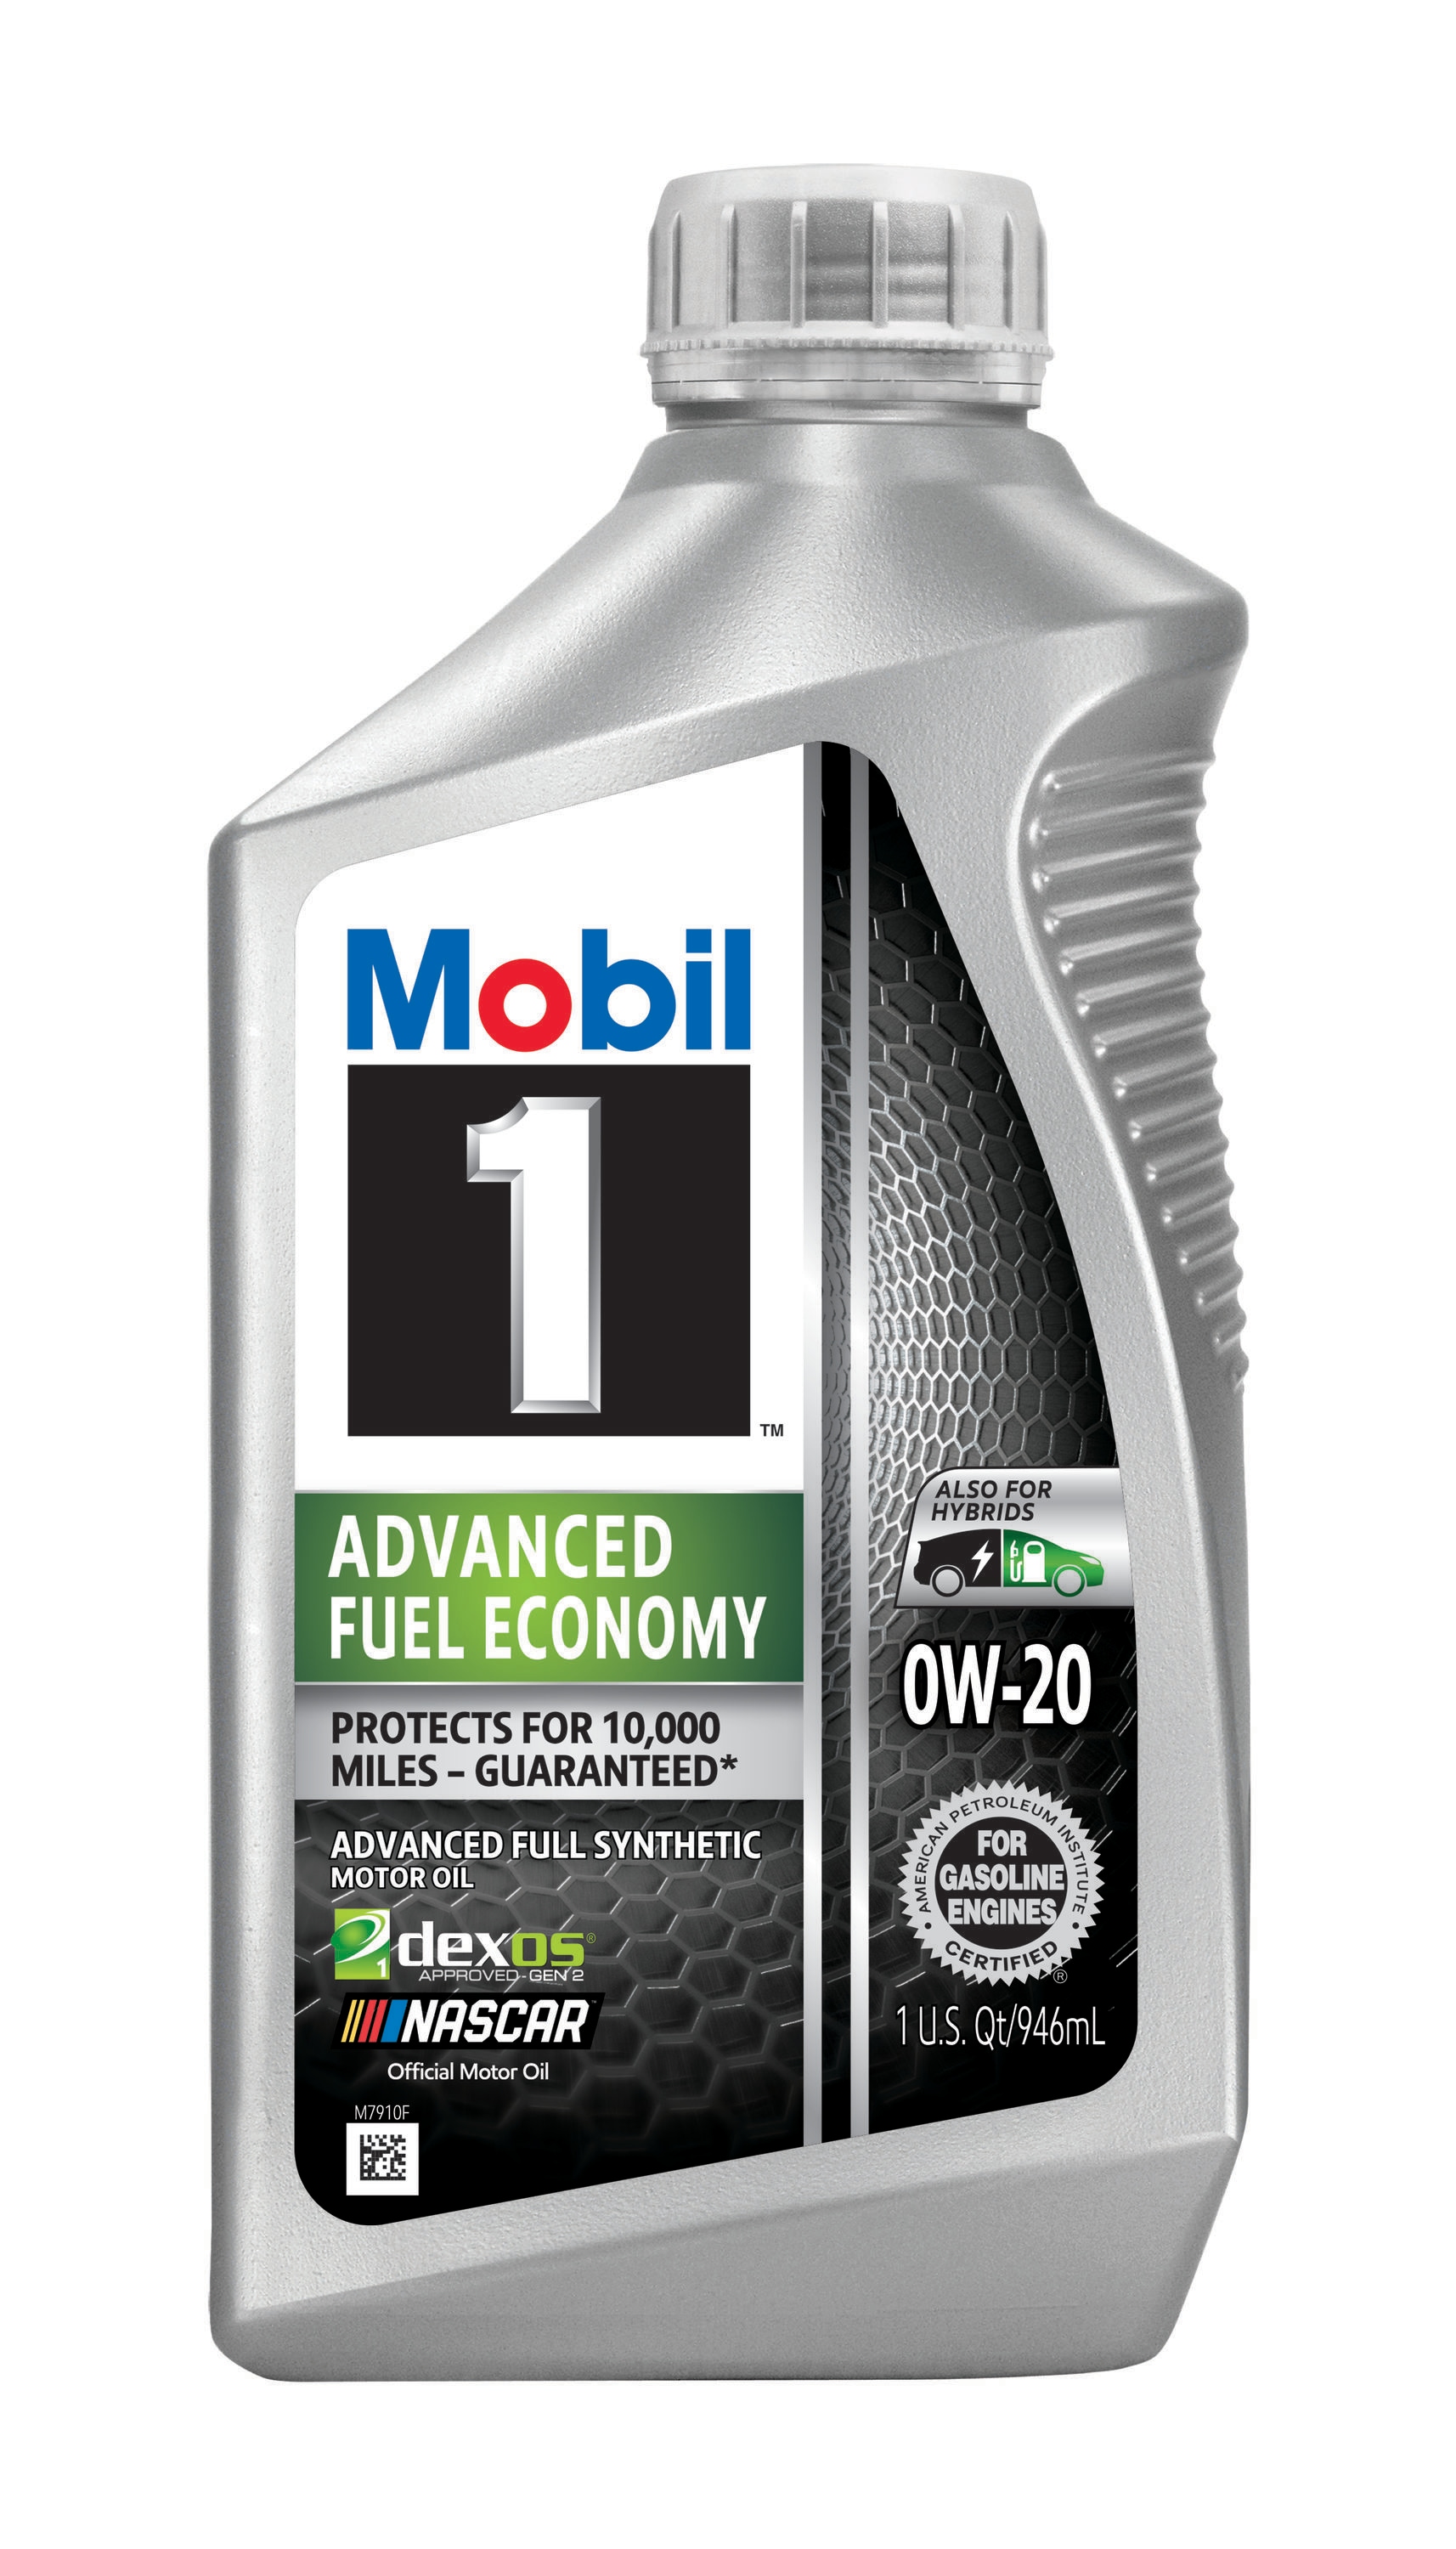 Is Mobil Good Oil